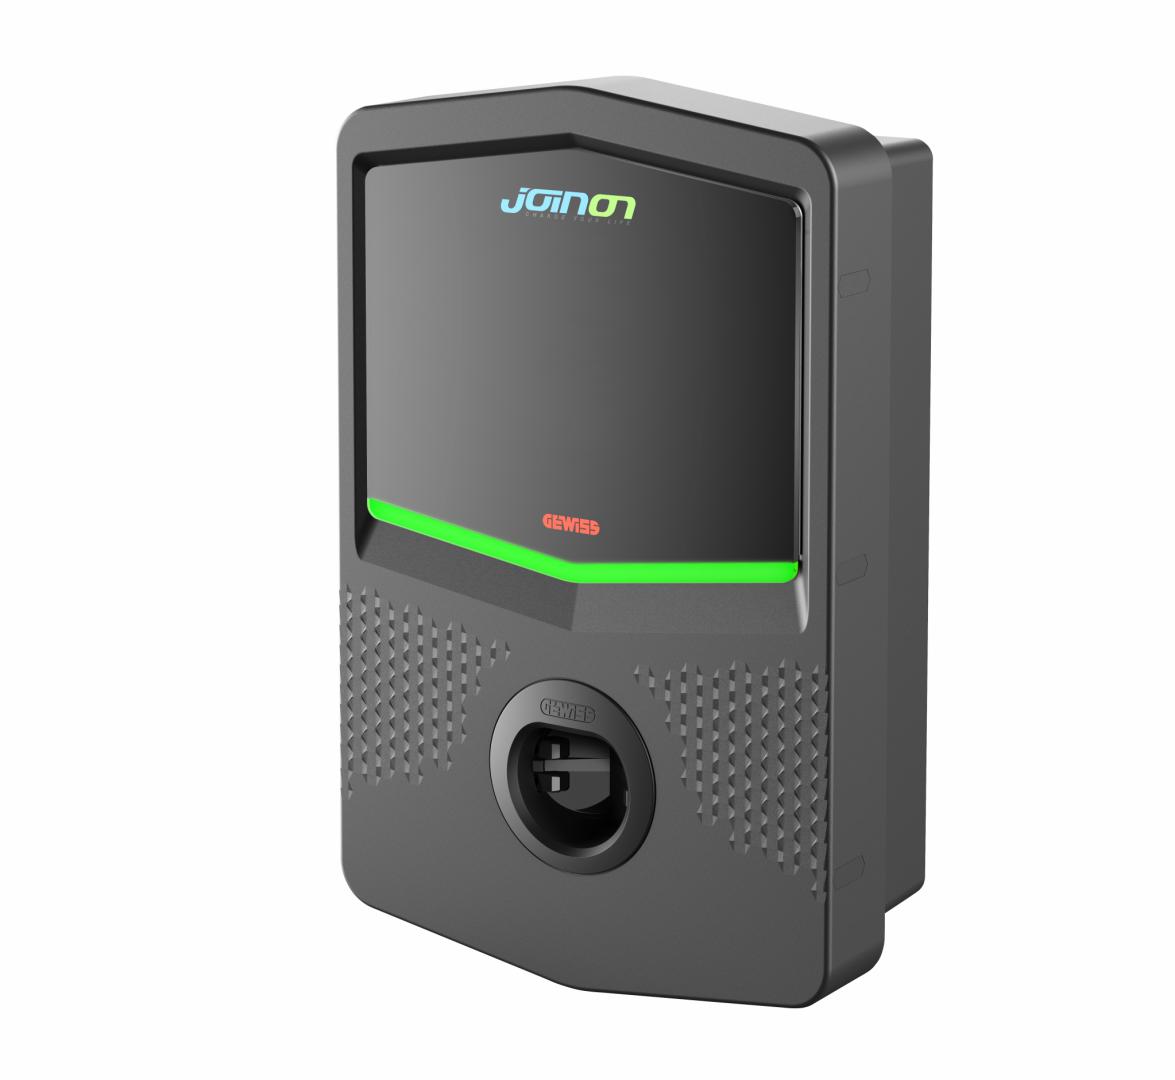 I-CON Wall Box - Wall-Mounting Charging Station, 4.6kW, 220V, 20A, IP55 ,AUTOSTART - Type 2 Vandal Proof With Shutter